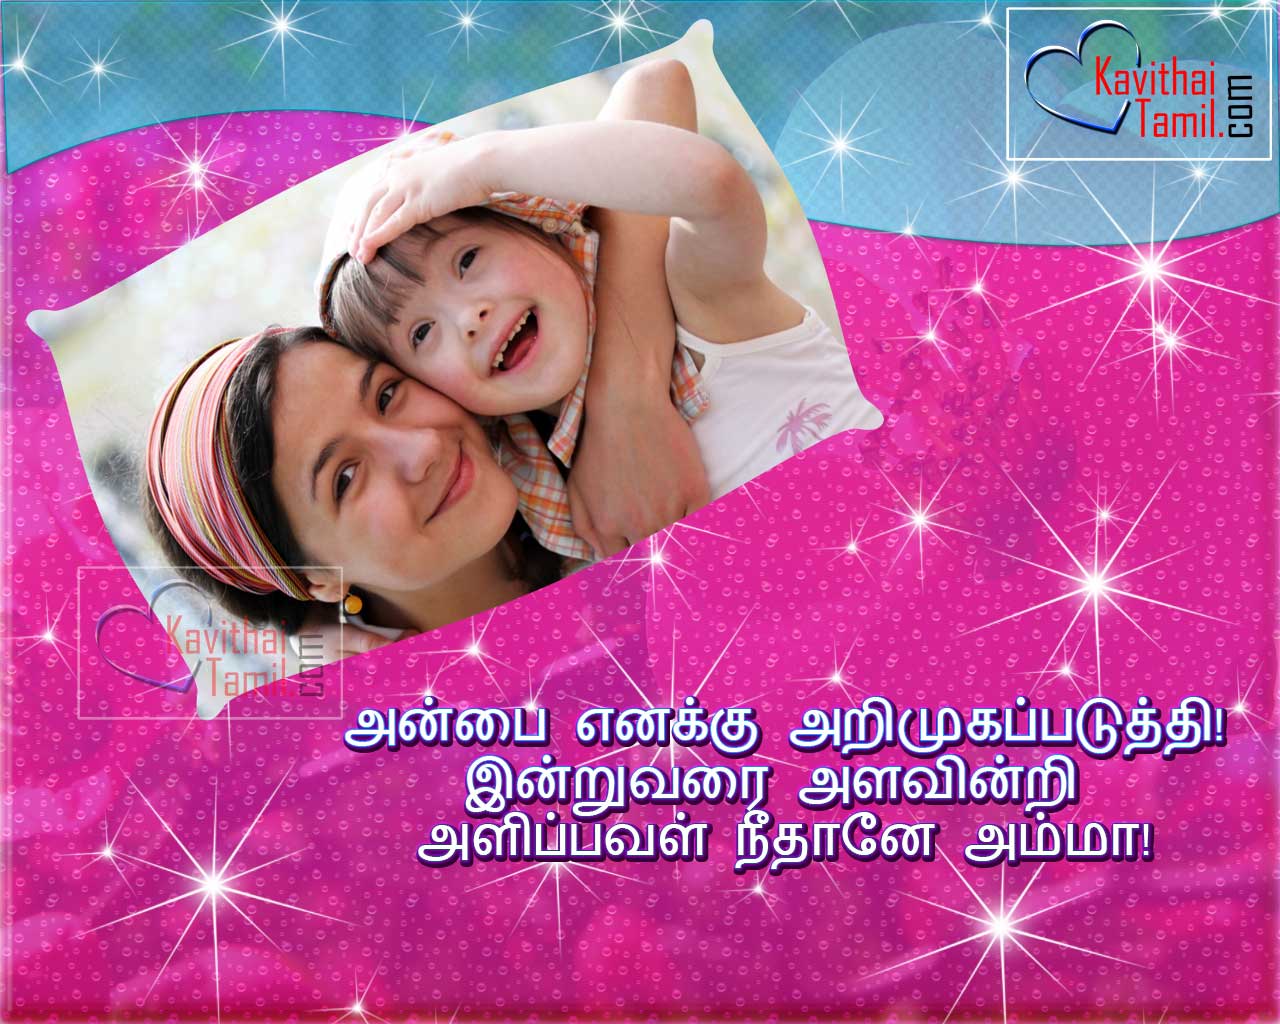 Mother's Day Special Tamil Ammavin Anbu Kavithaigal With Hd Wallpapers For Wishing Your Lovable Mother